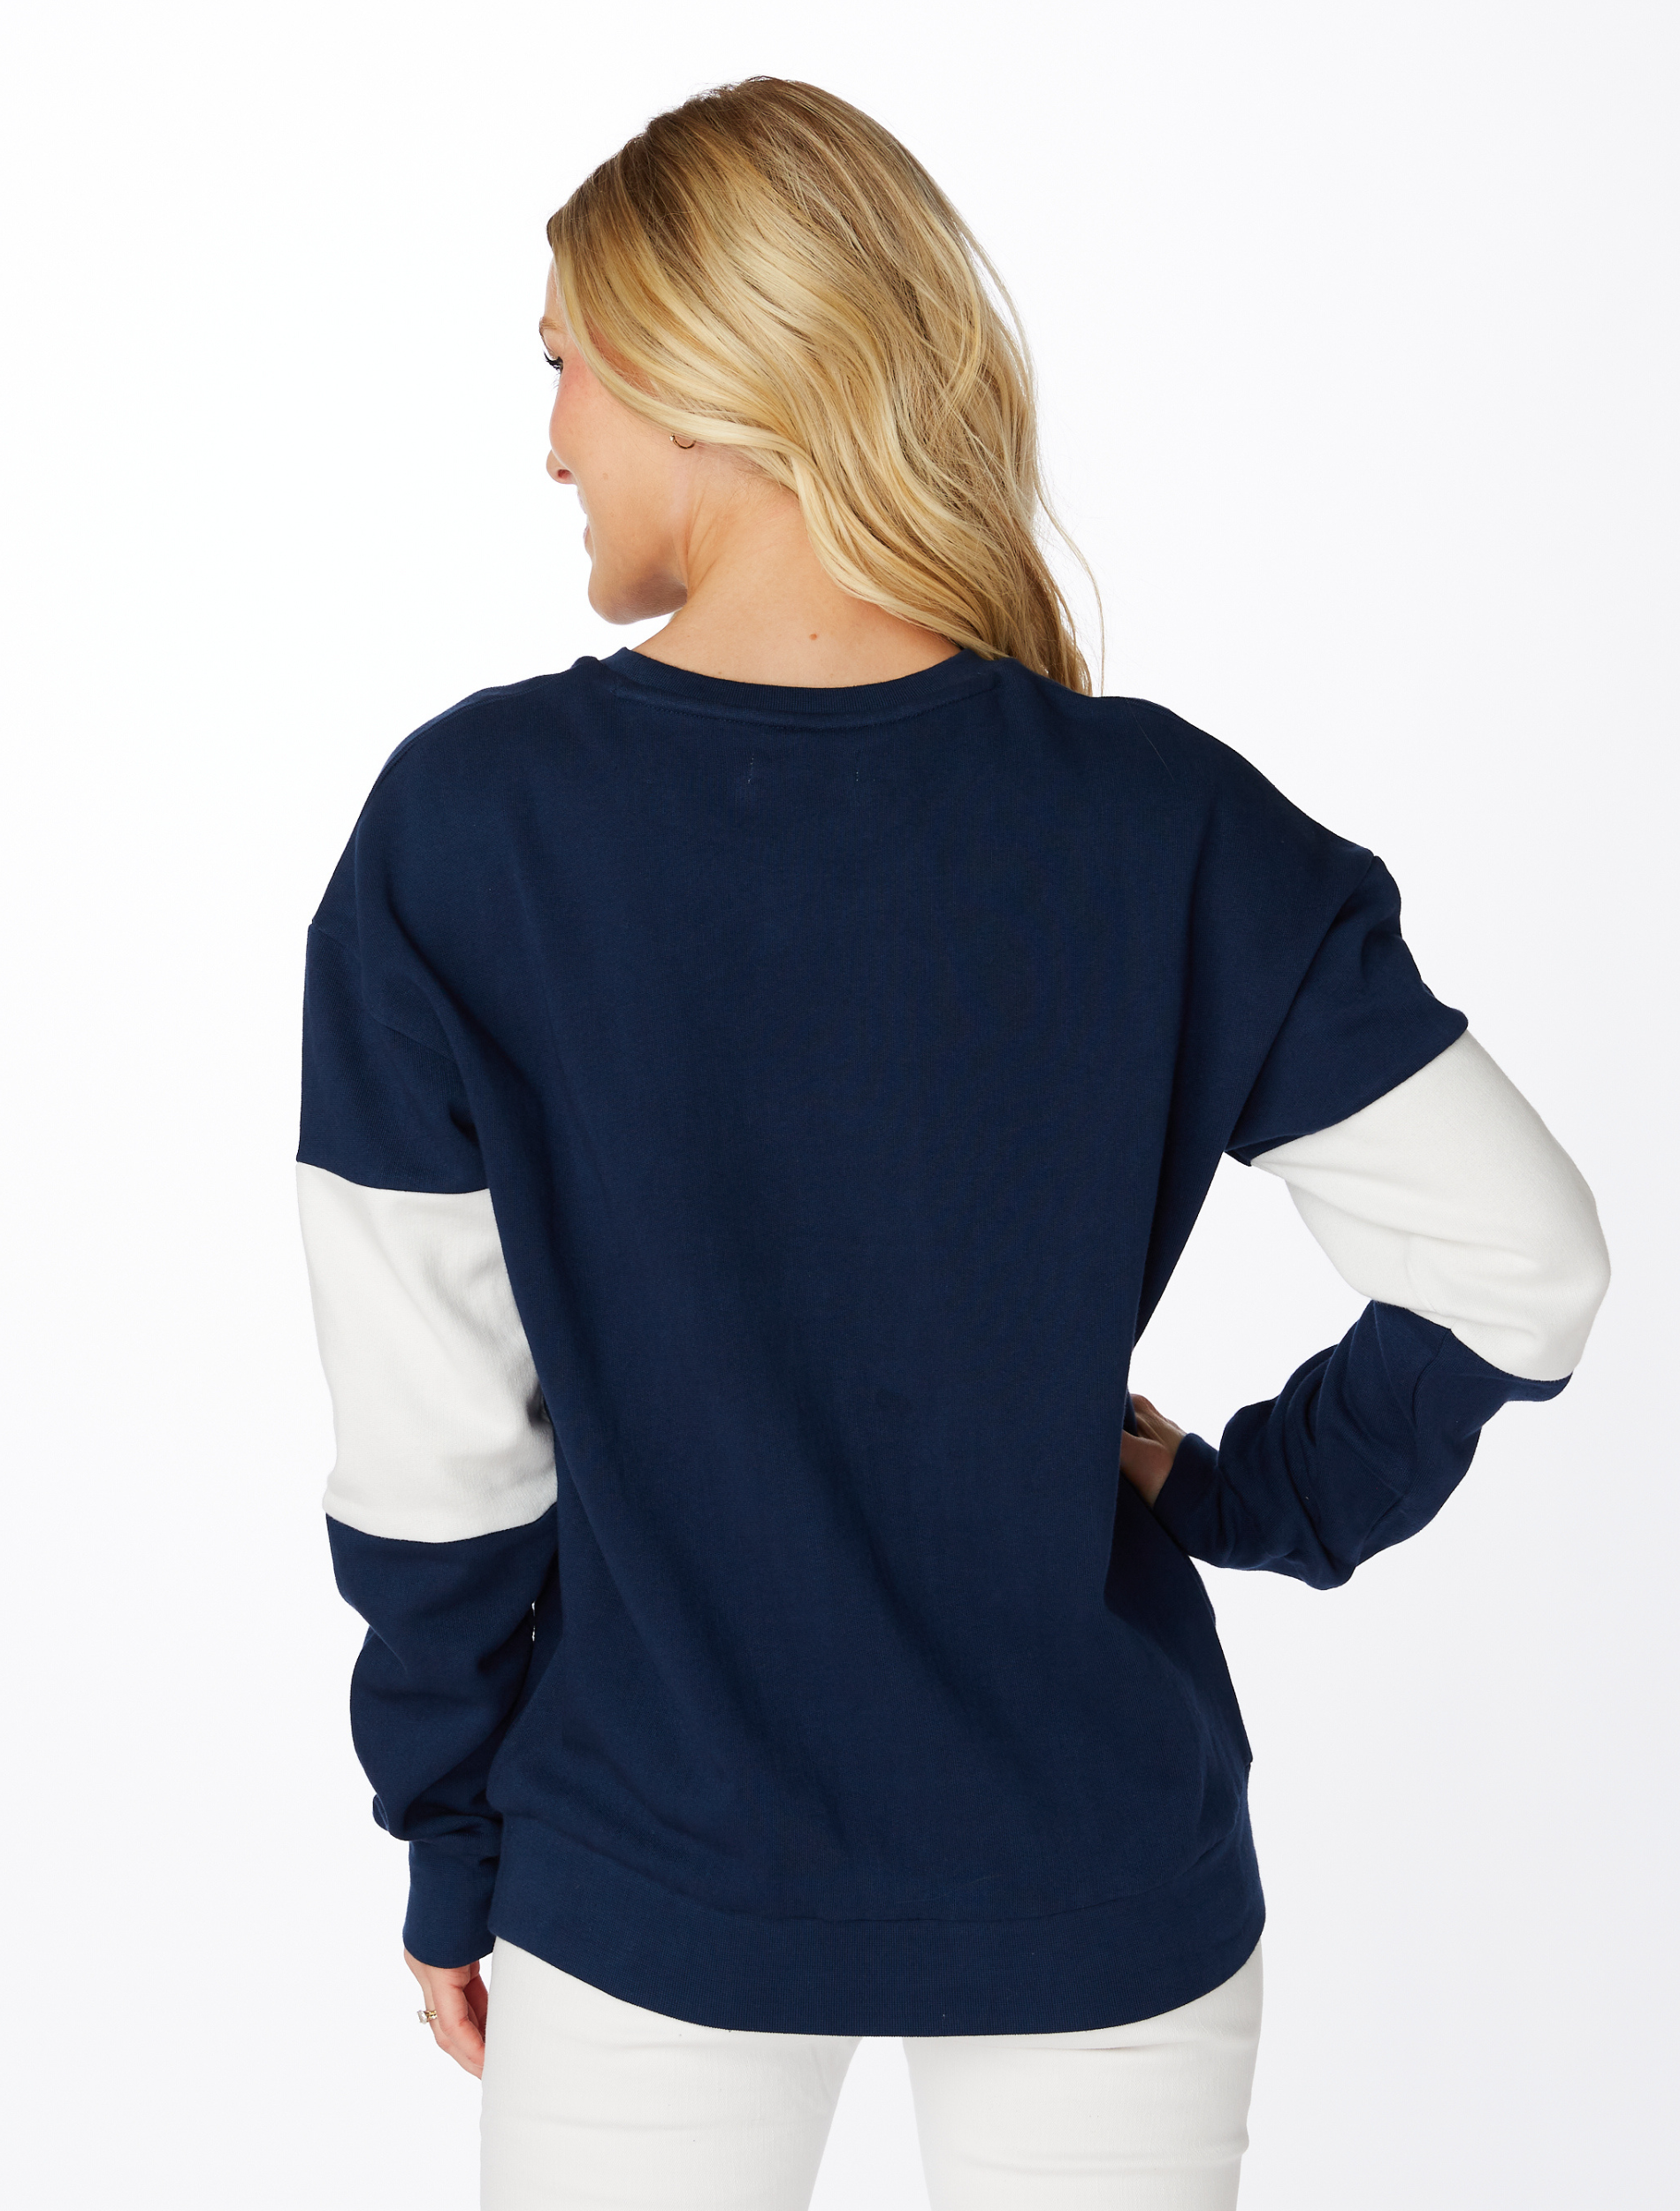 The Auburn Southlawn Comfy Cord Pullover - S  Trendy clothes for women,  Auburn sweatshirt, Sweater dress oversized